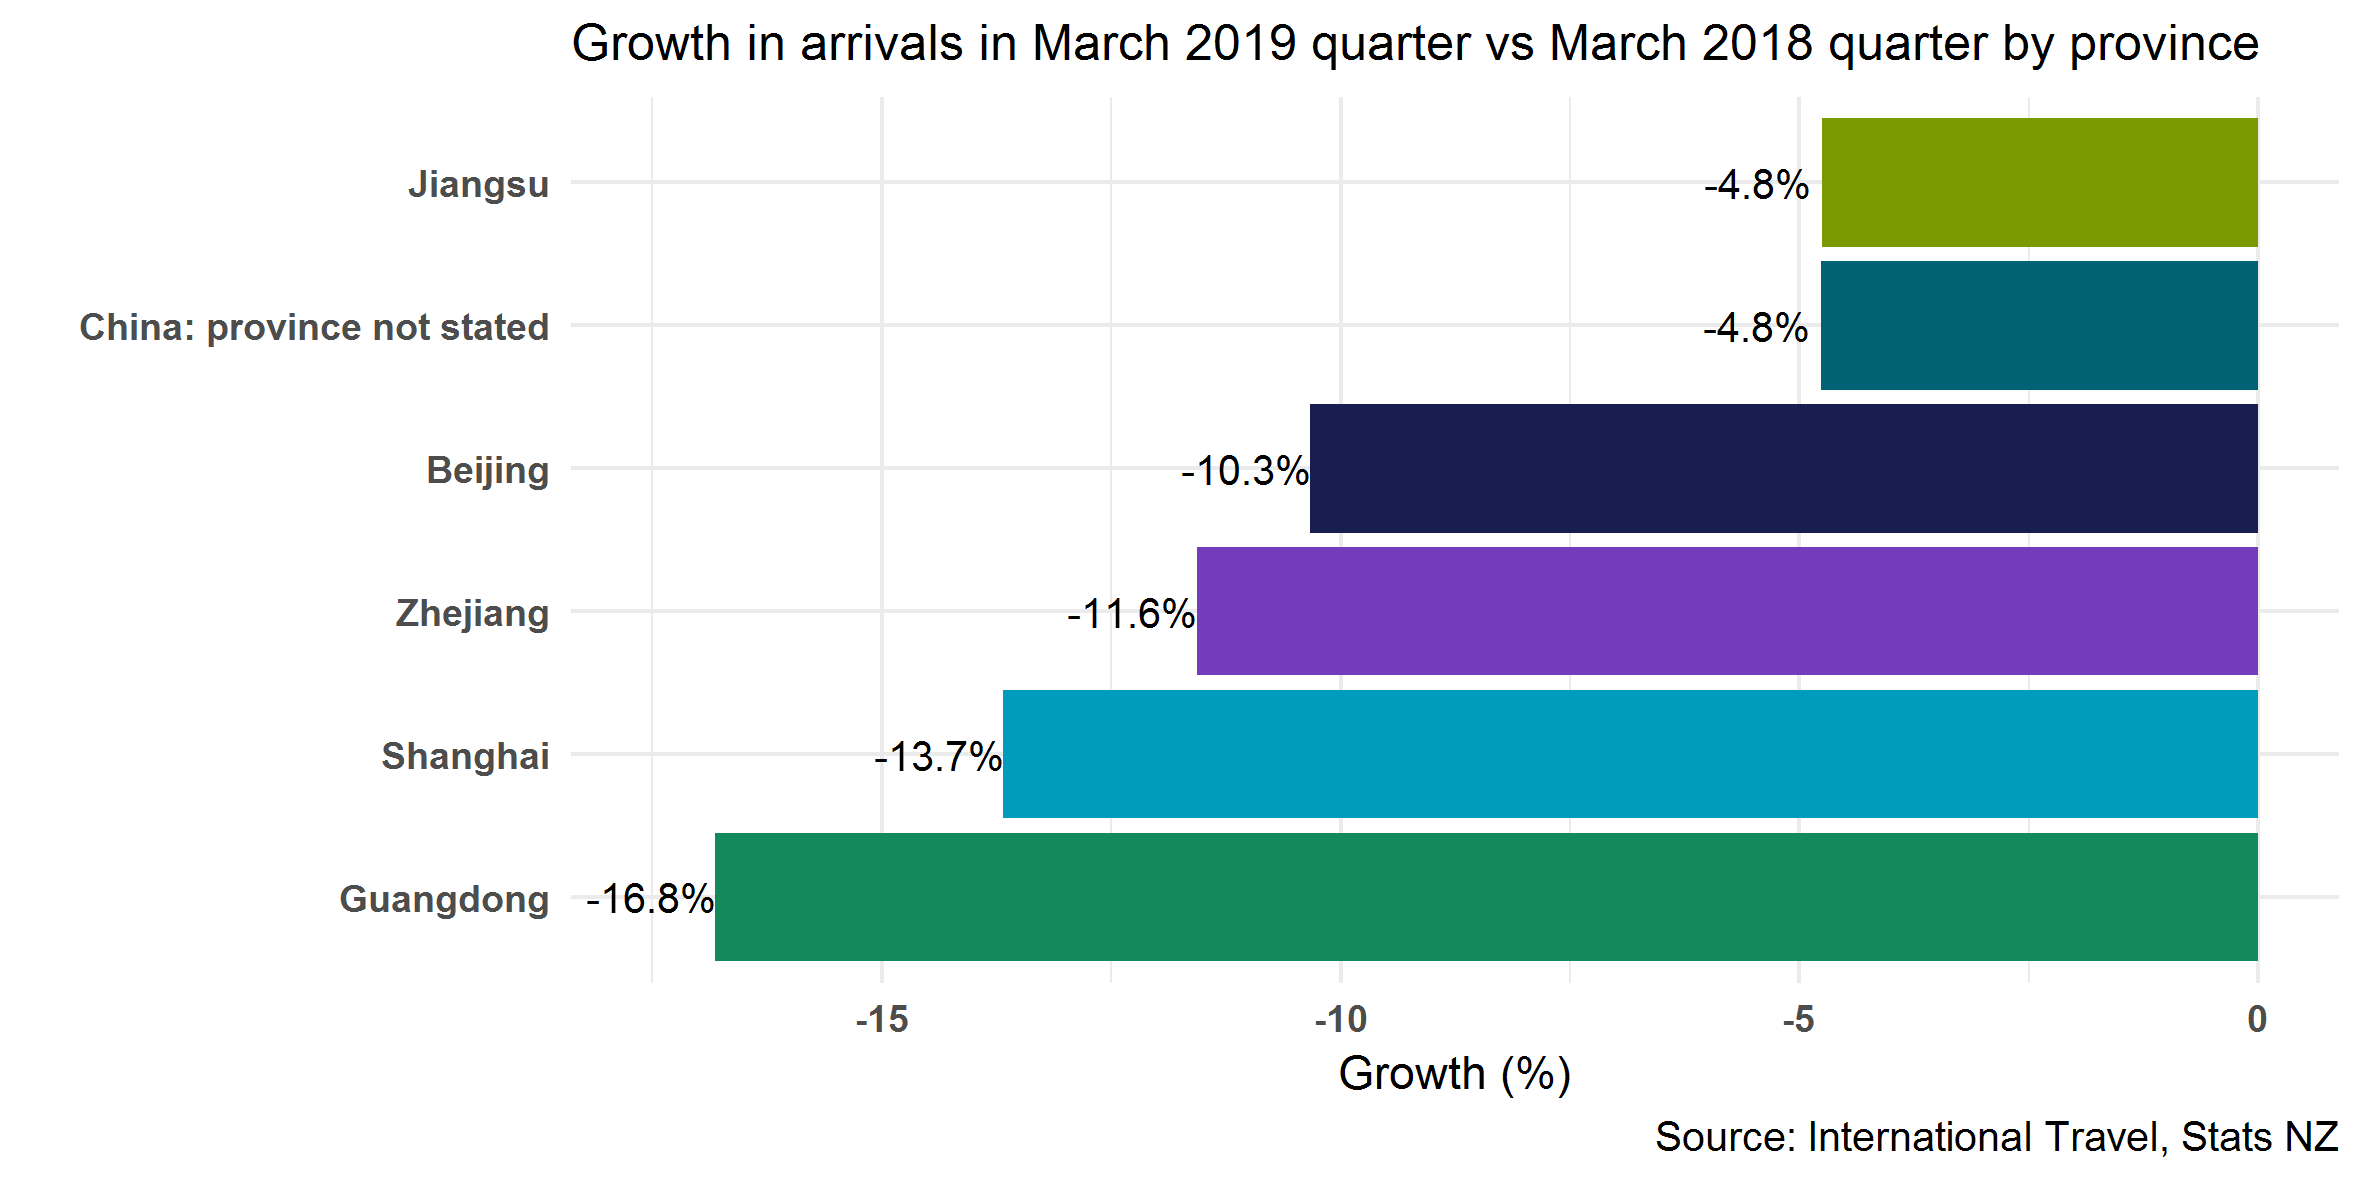 Growth in arrivals in March 2019 quarter vs March 2018 quarter by province